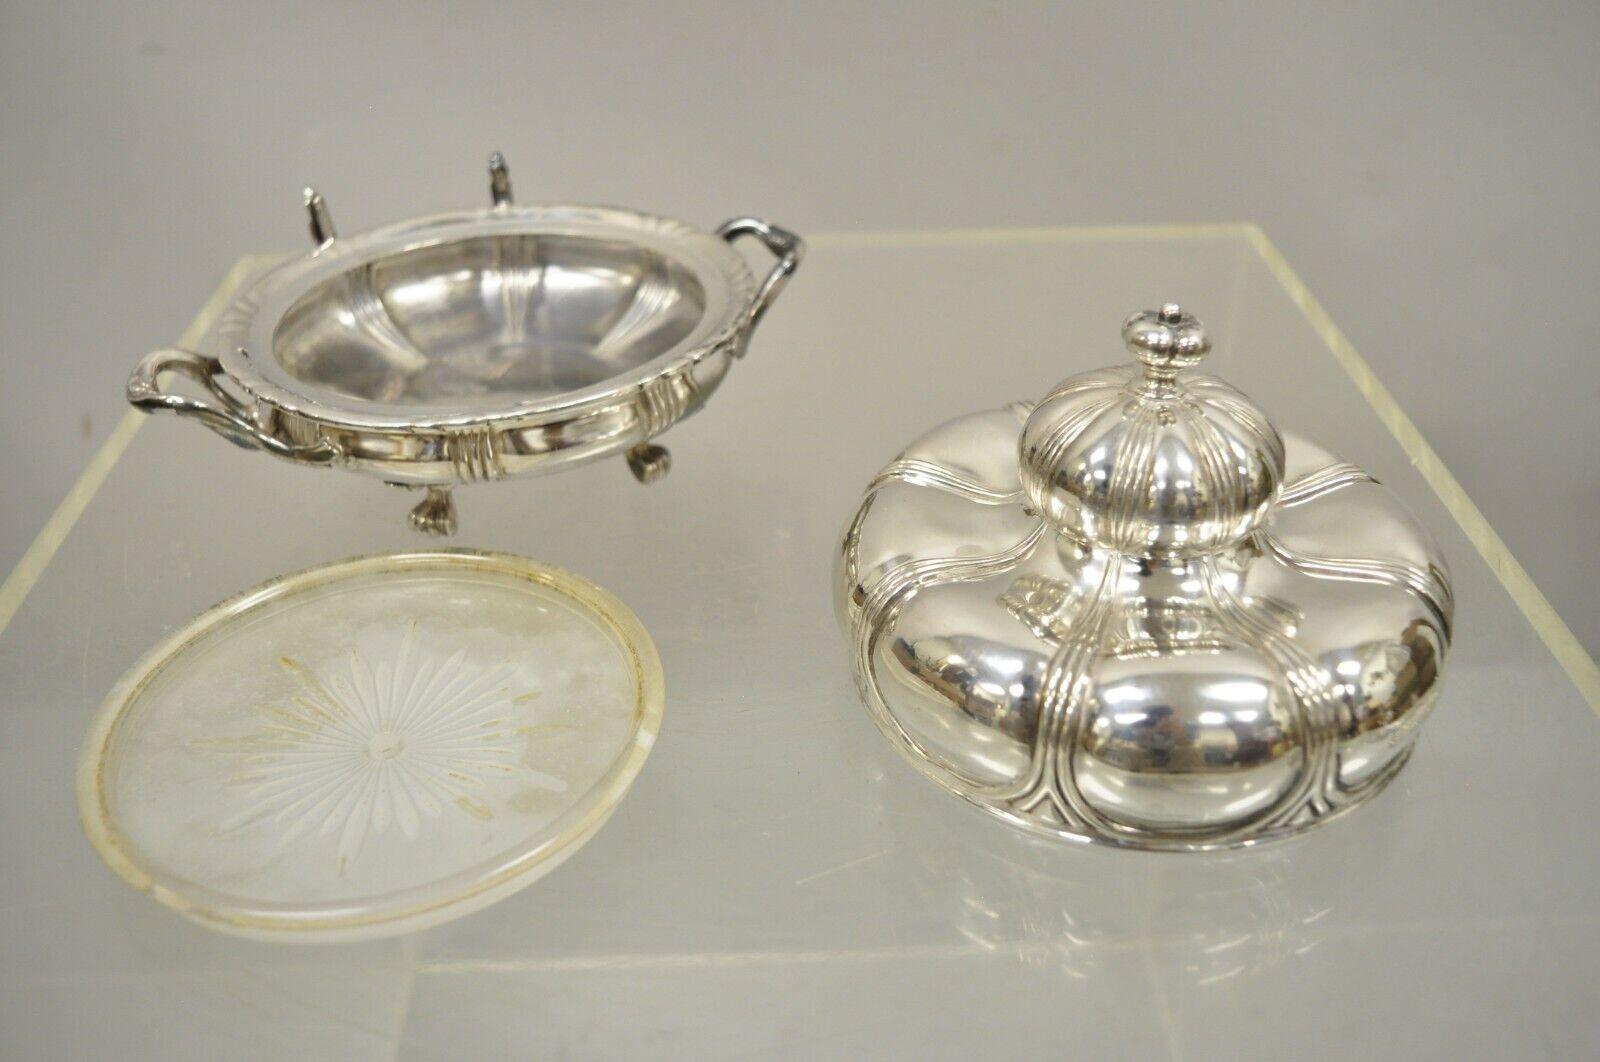 Vintage Pairpoint Silver Plated Covered Butter Bowl Covered Dish with Glass 3